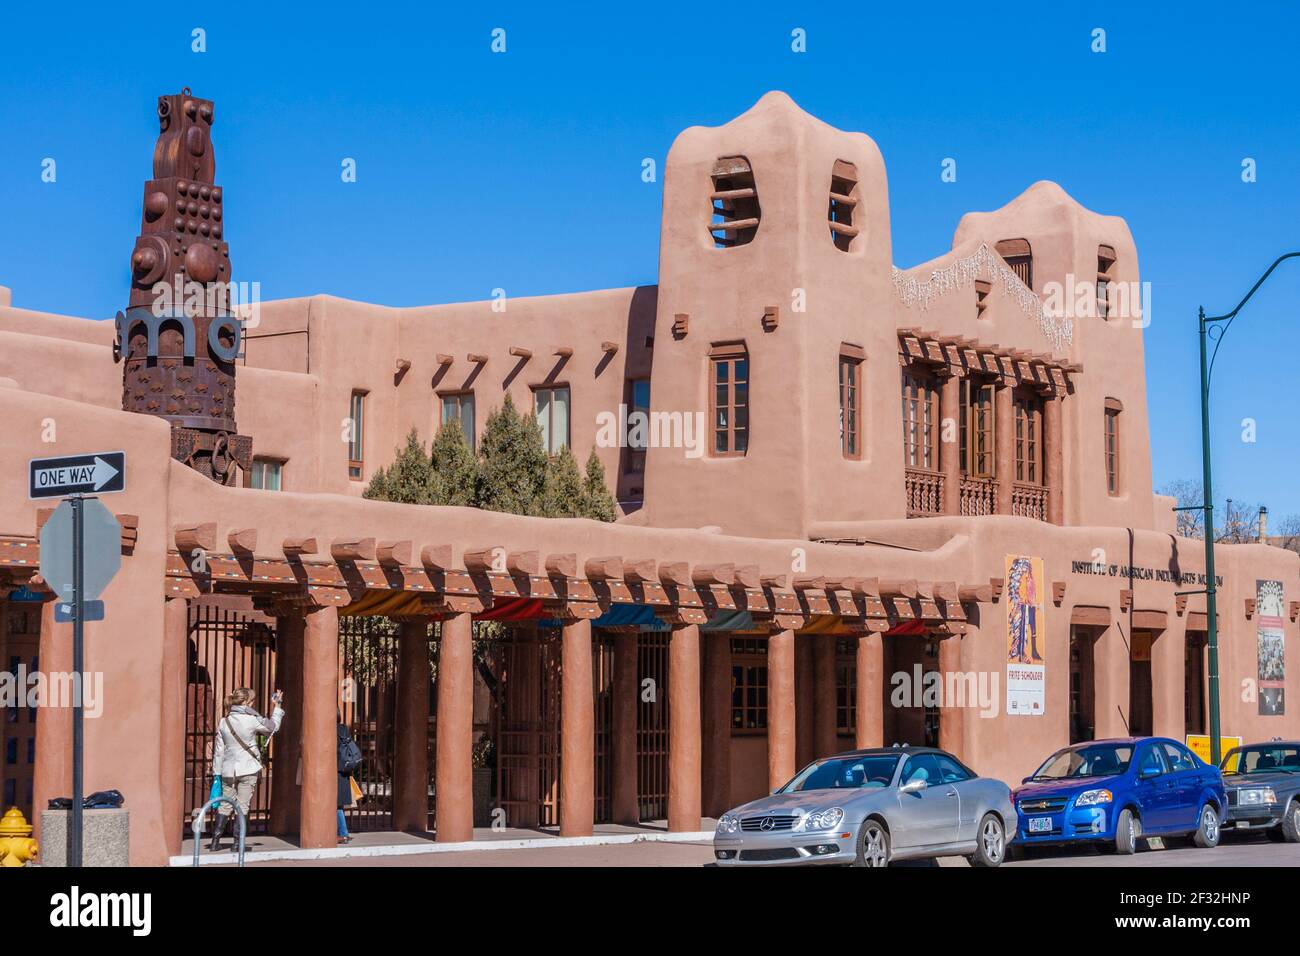 Institute of American Indian Arts in Santa Fe, New Mexico. Stock Photo